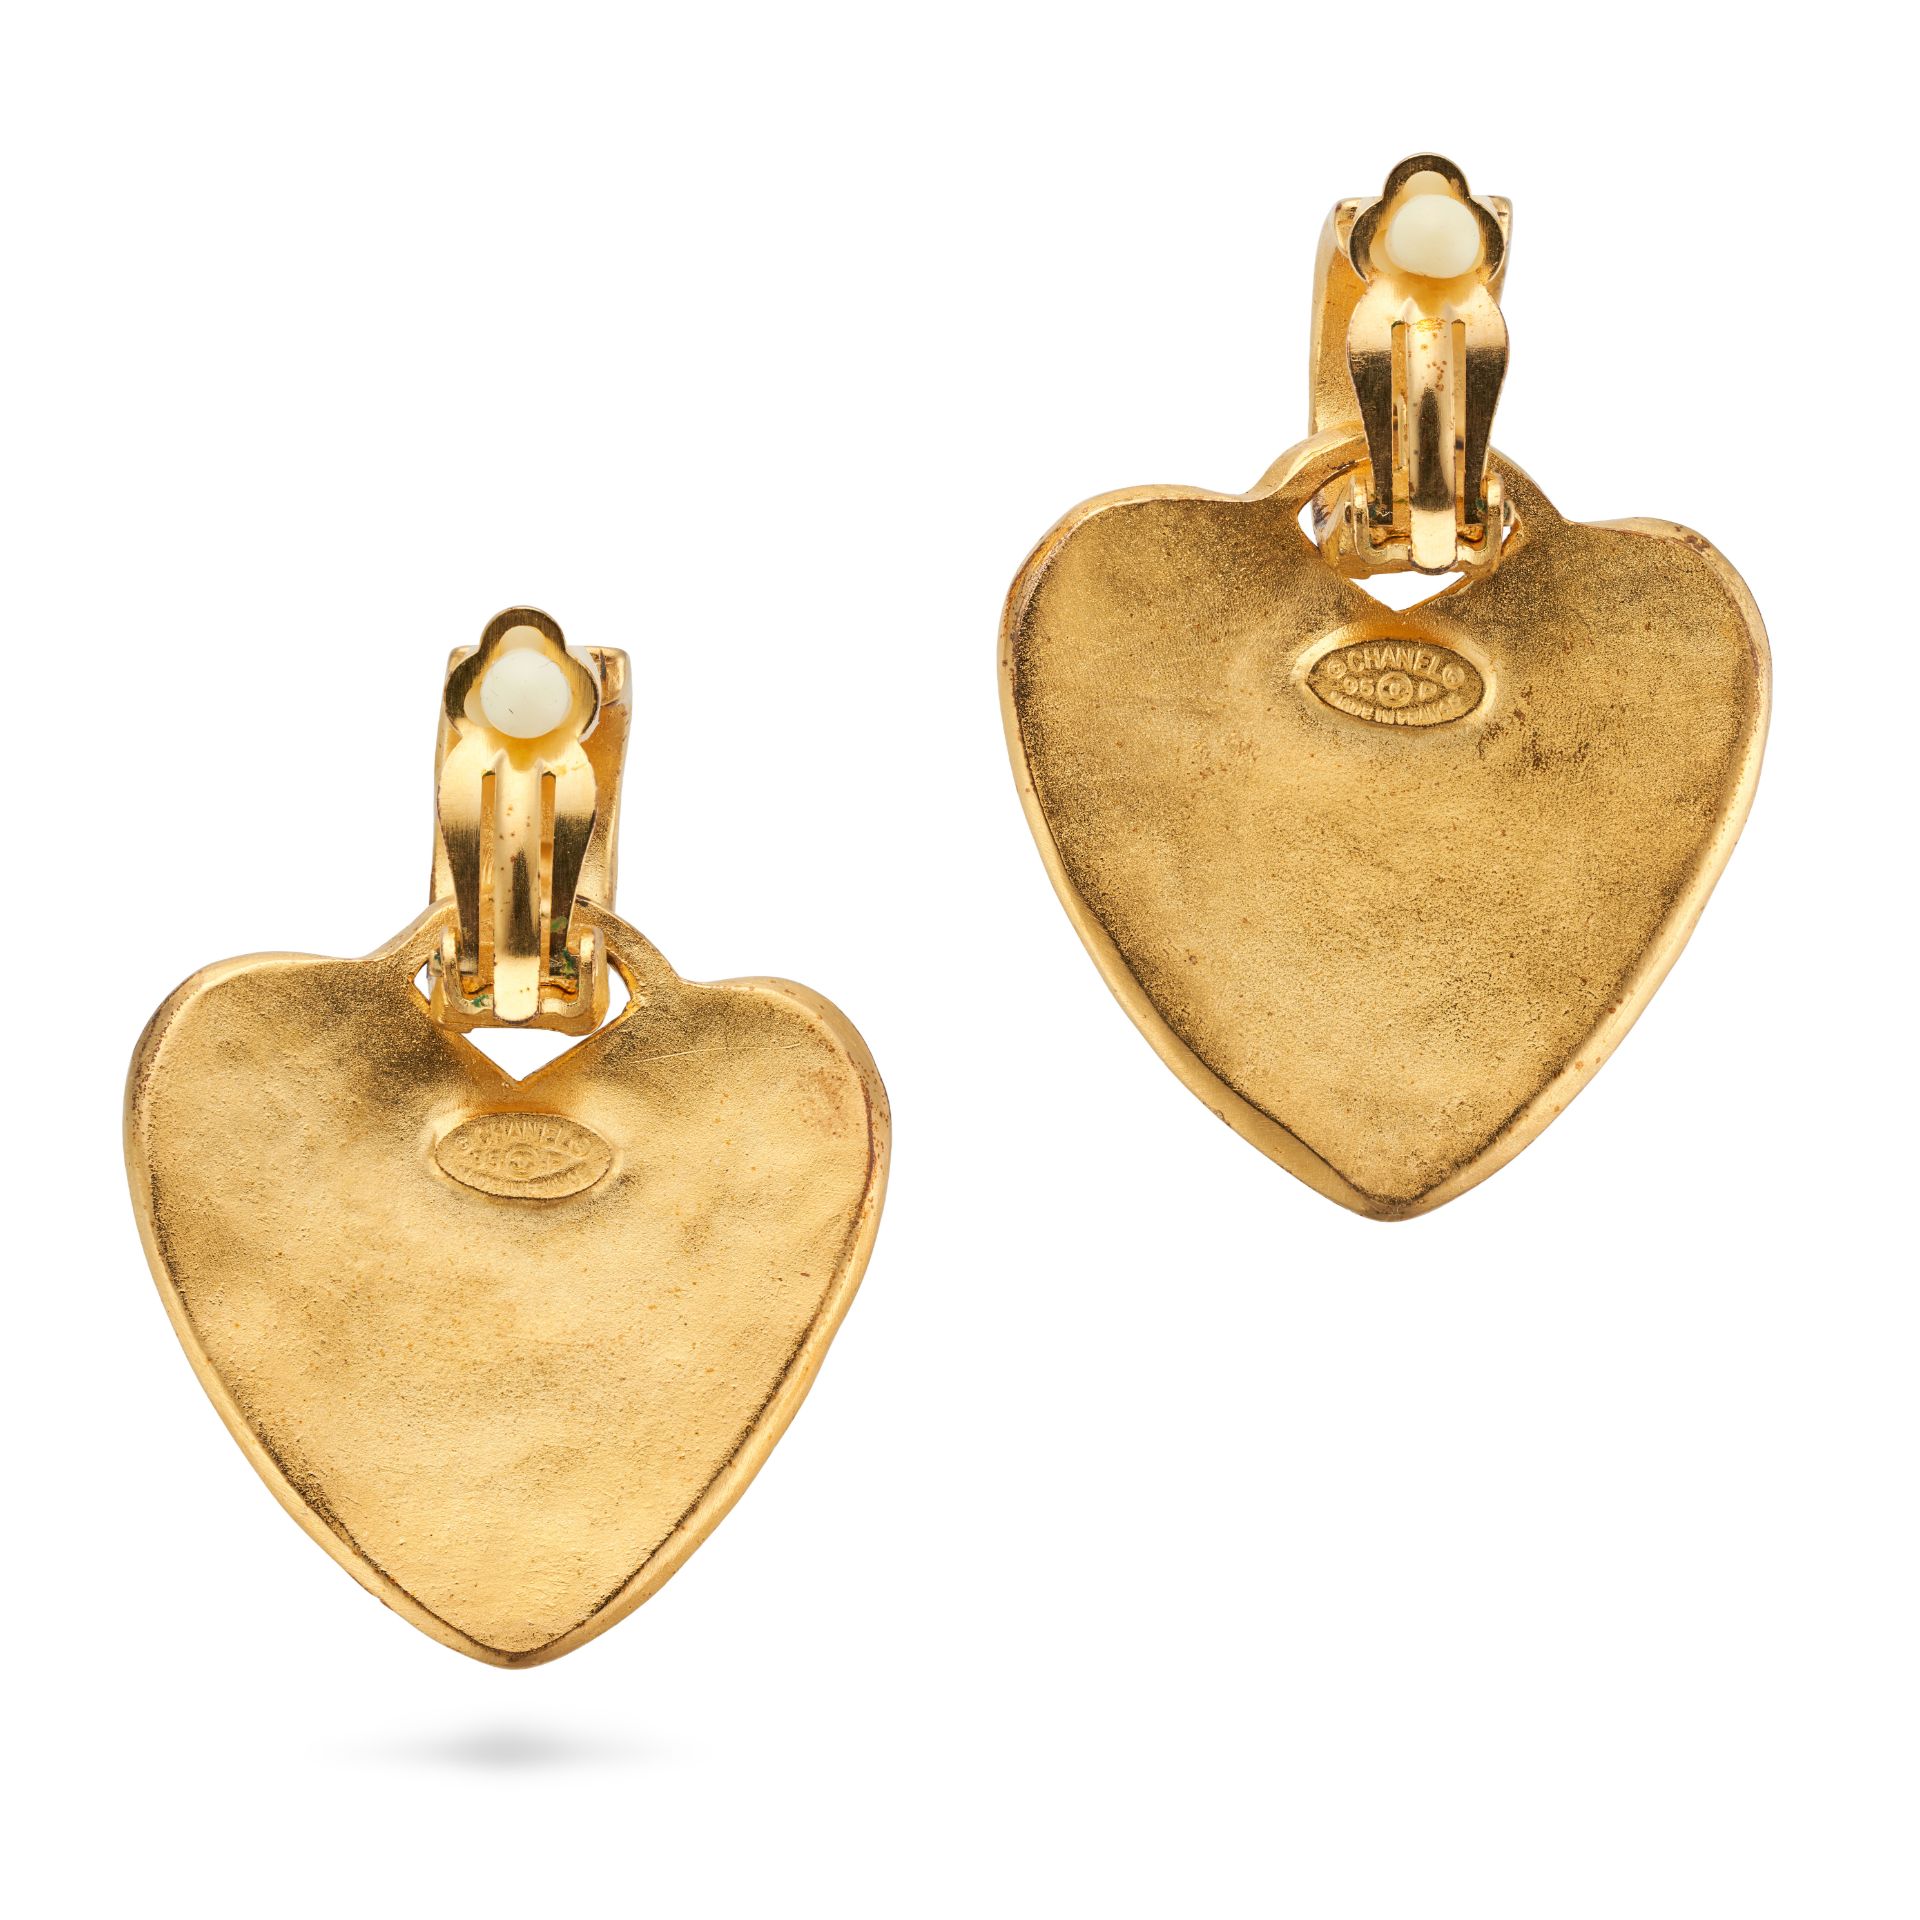 CHANEL, A PAIR OF VINTAGE CLIP EARRINGS each comprising a heart shape charm with interlocking CC ... - Image 2 of 2